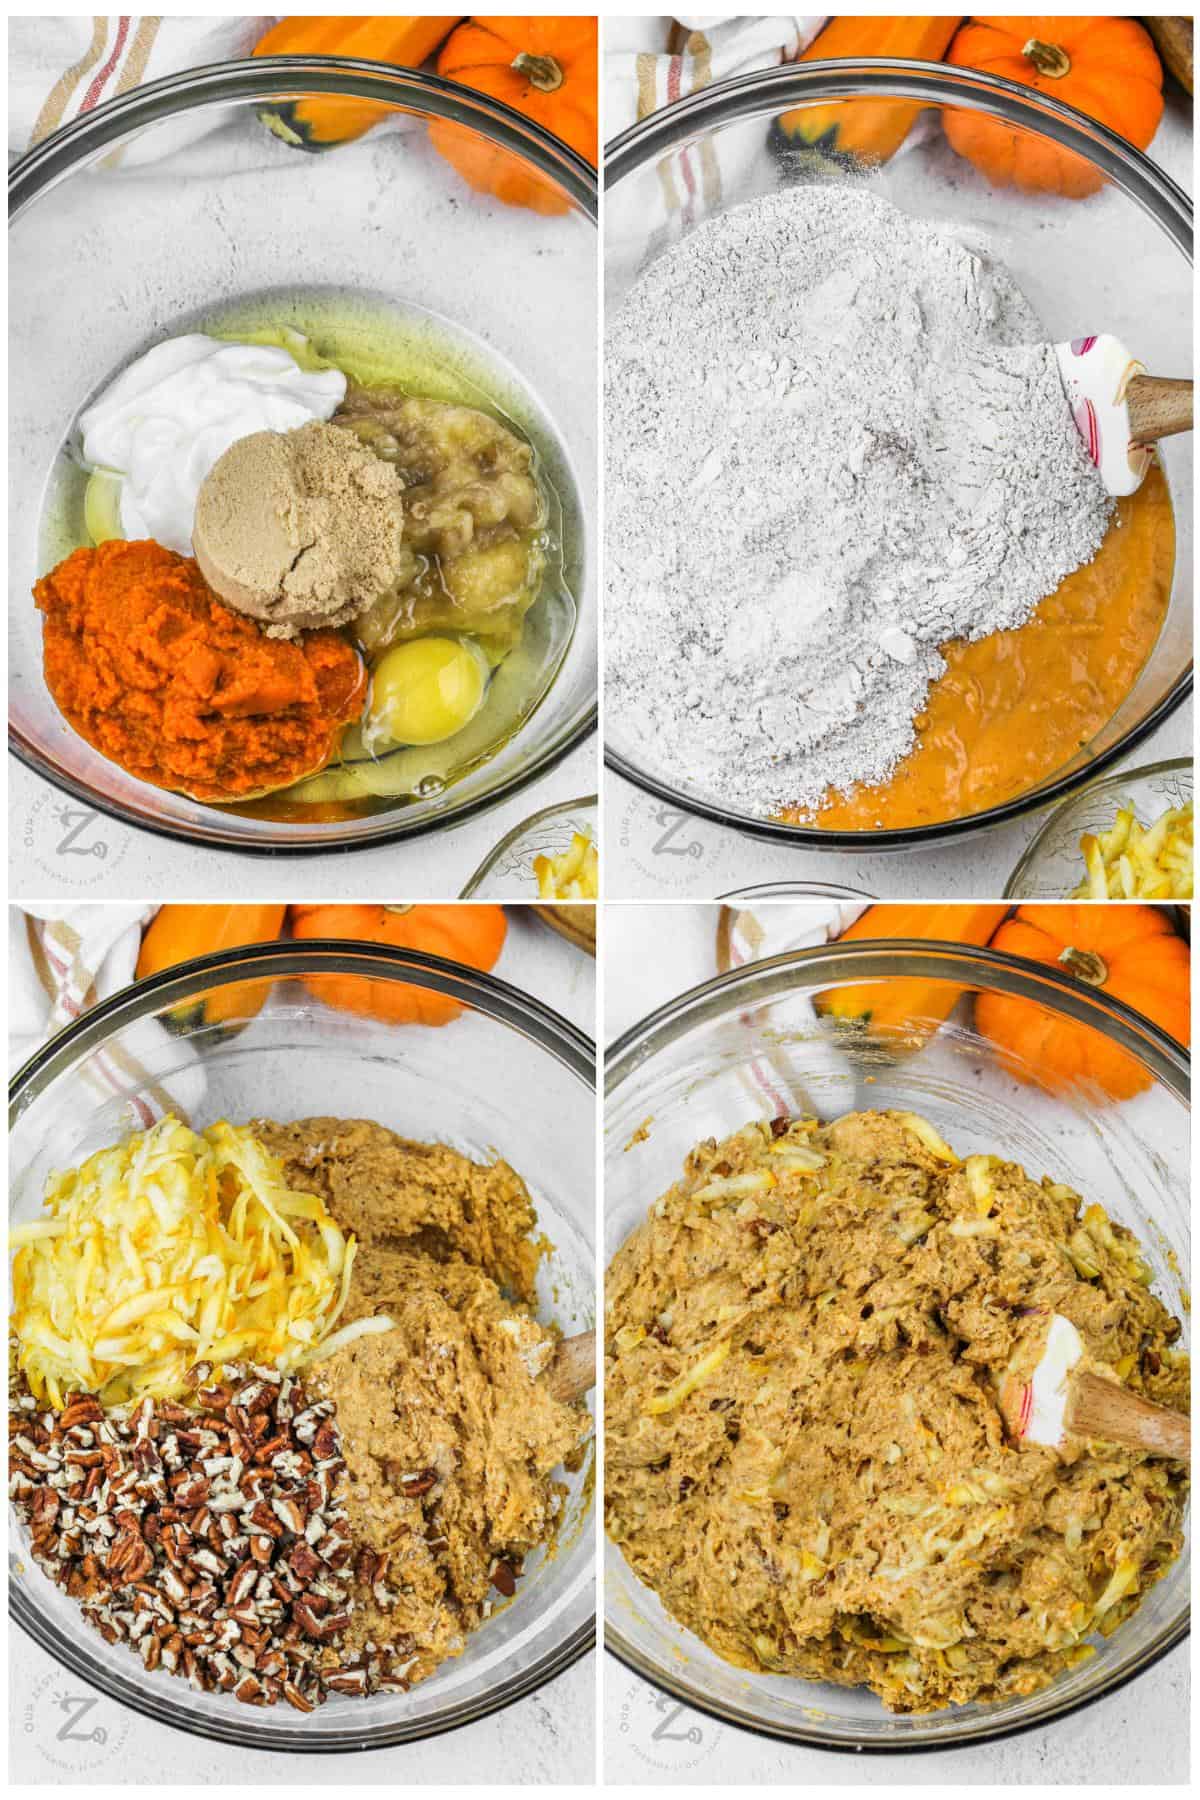 process of adding ingredients together to make Pumpkin Zucchini Bread batter